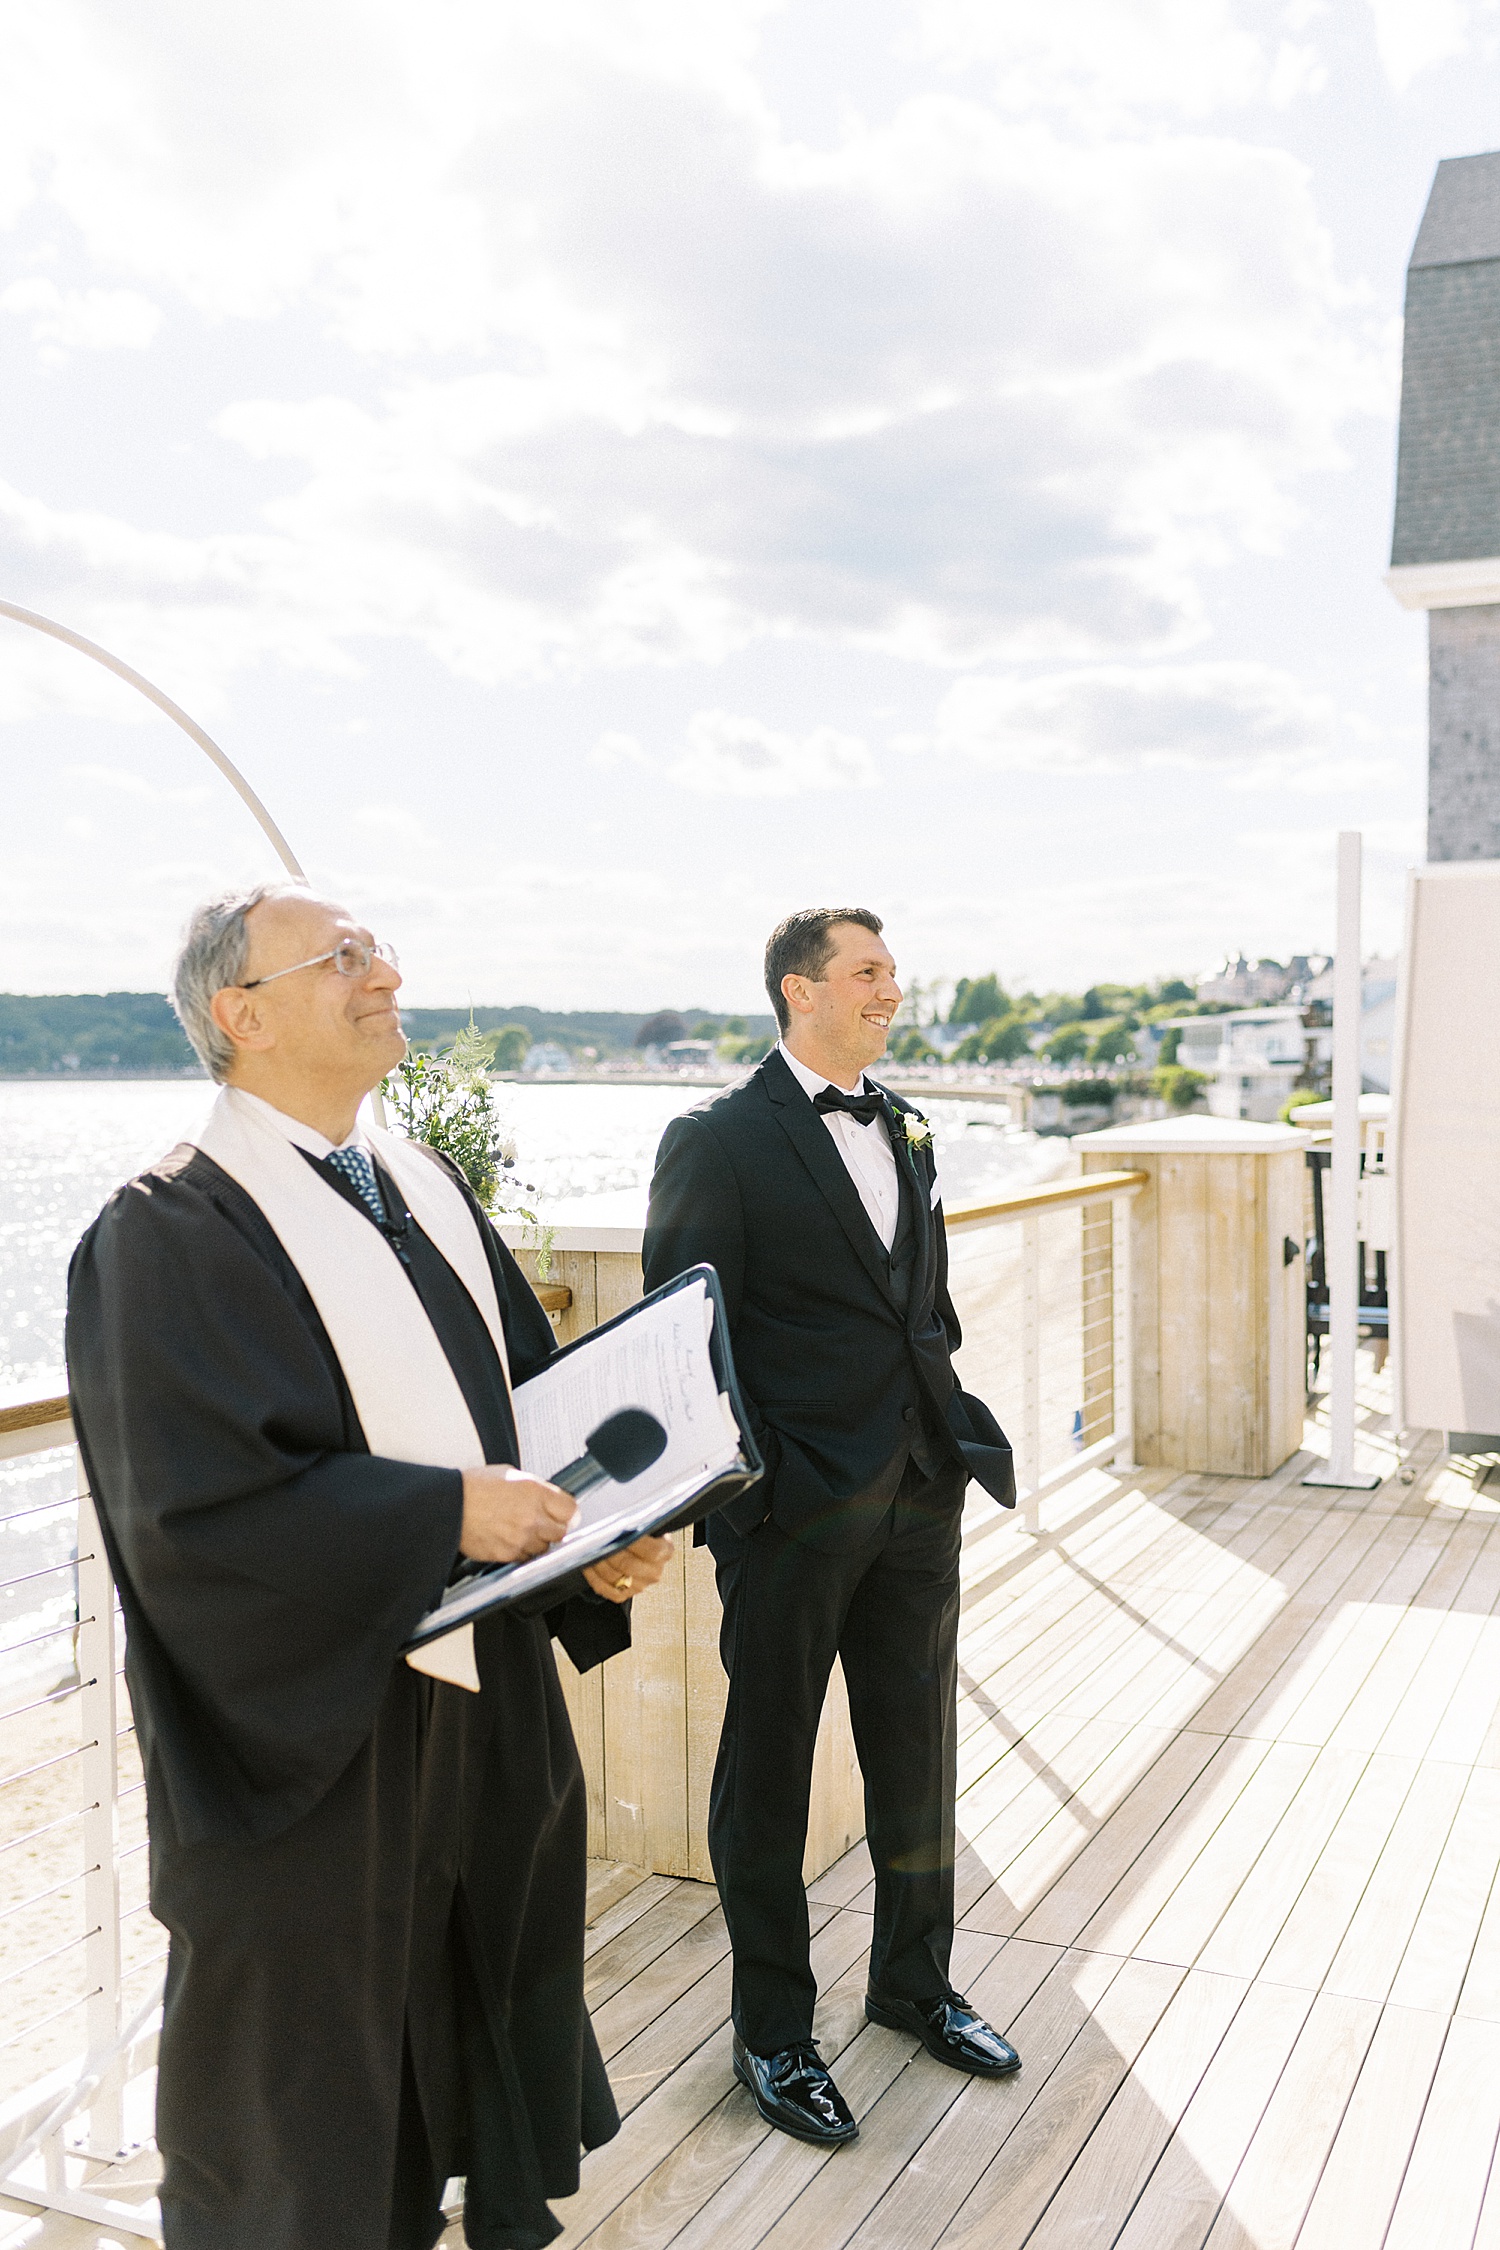 Groom watching his bride walk down the aisle by Lynne Reznick photography